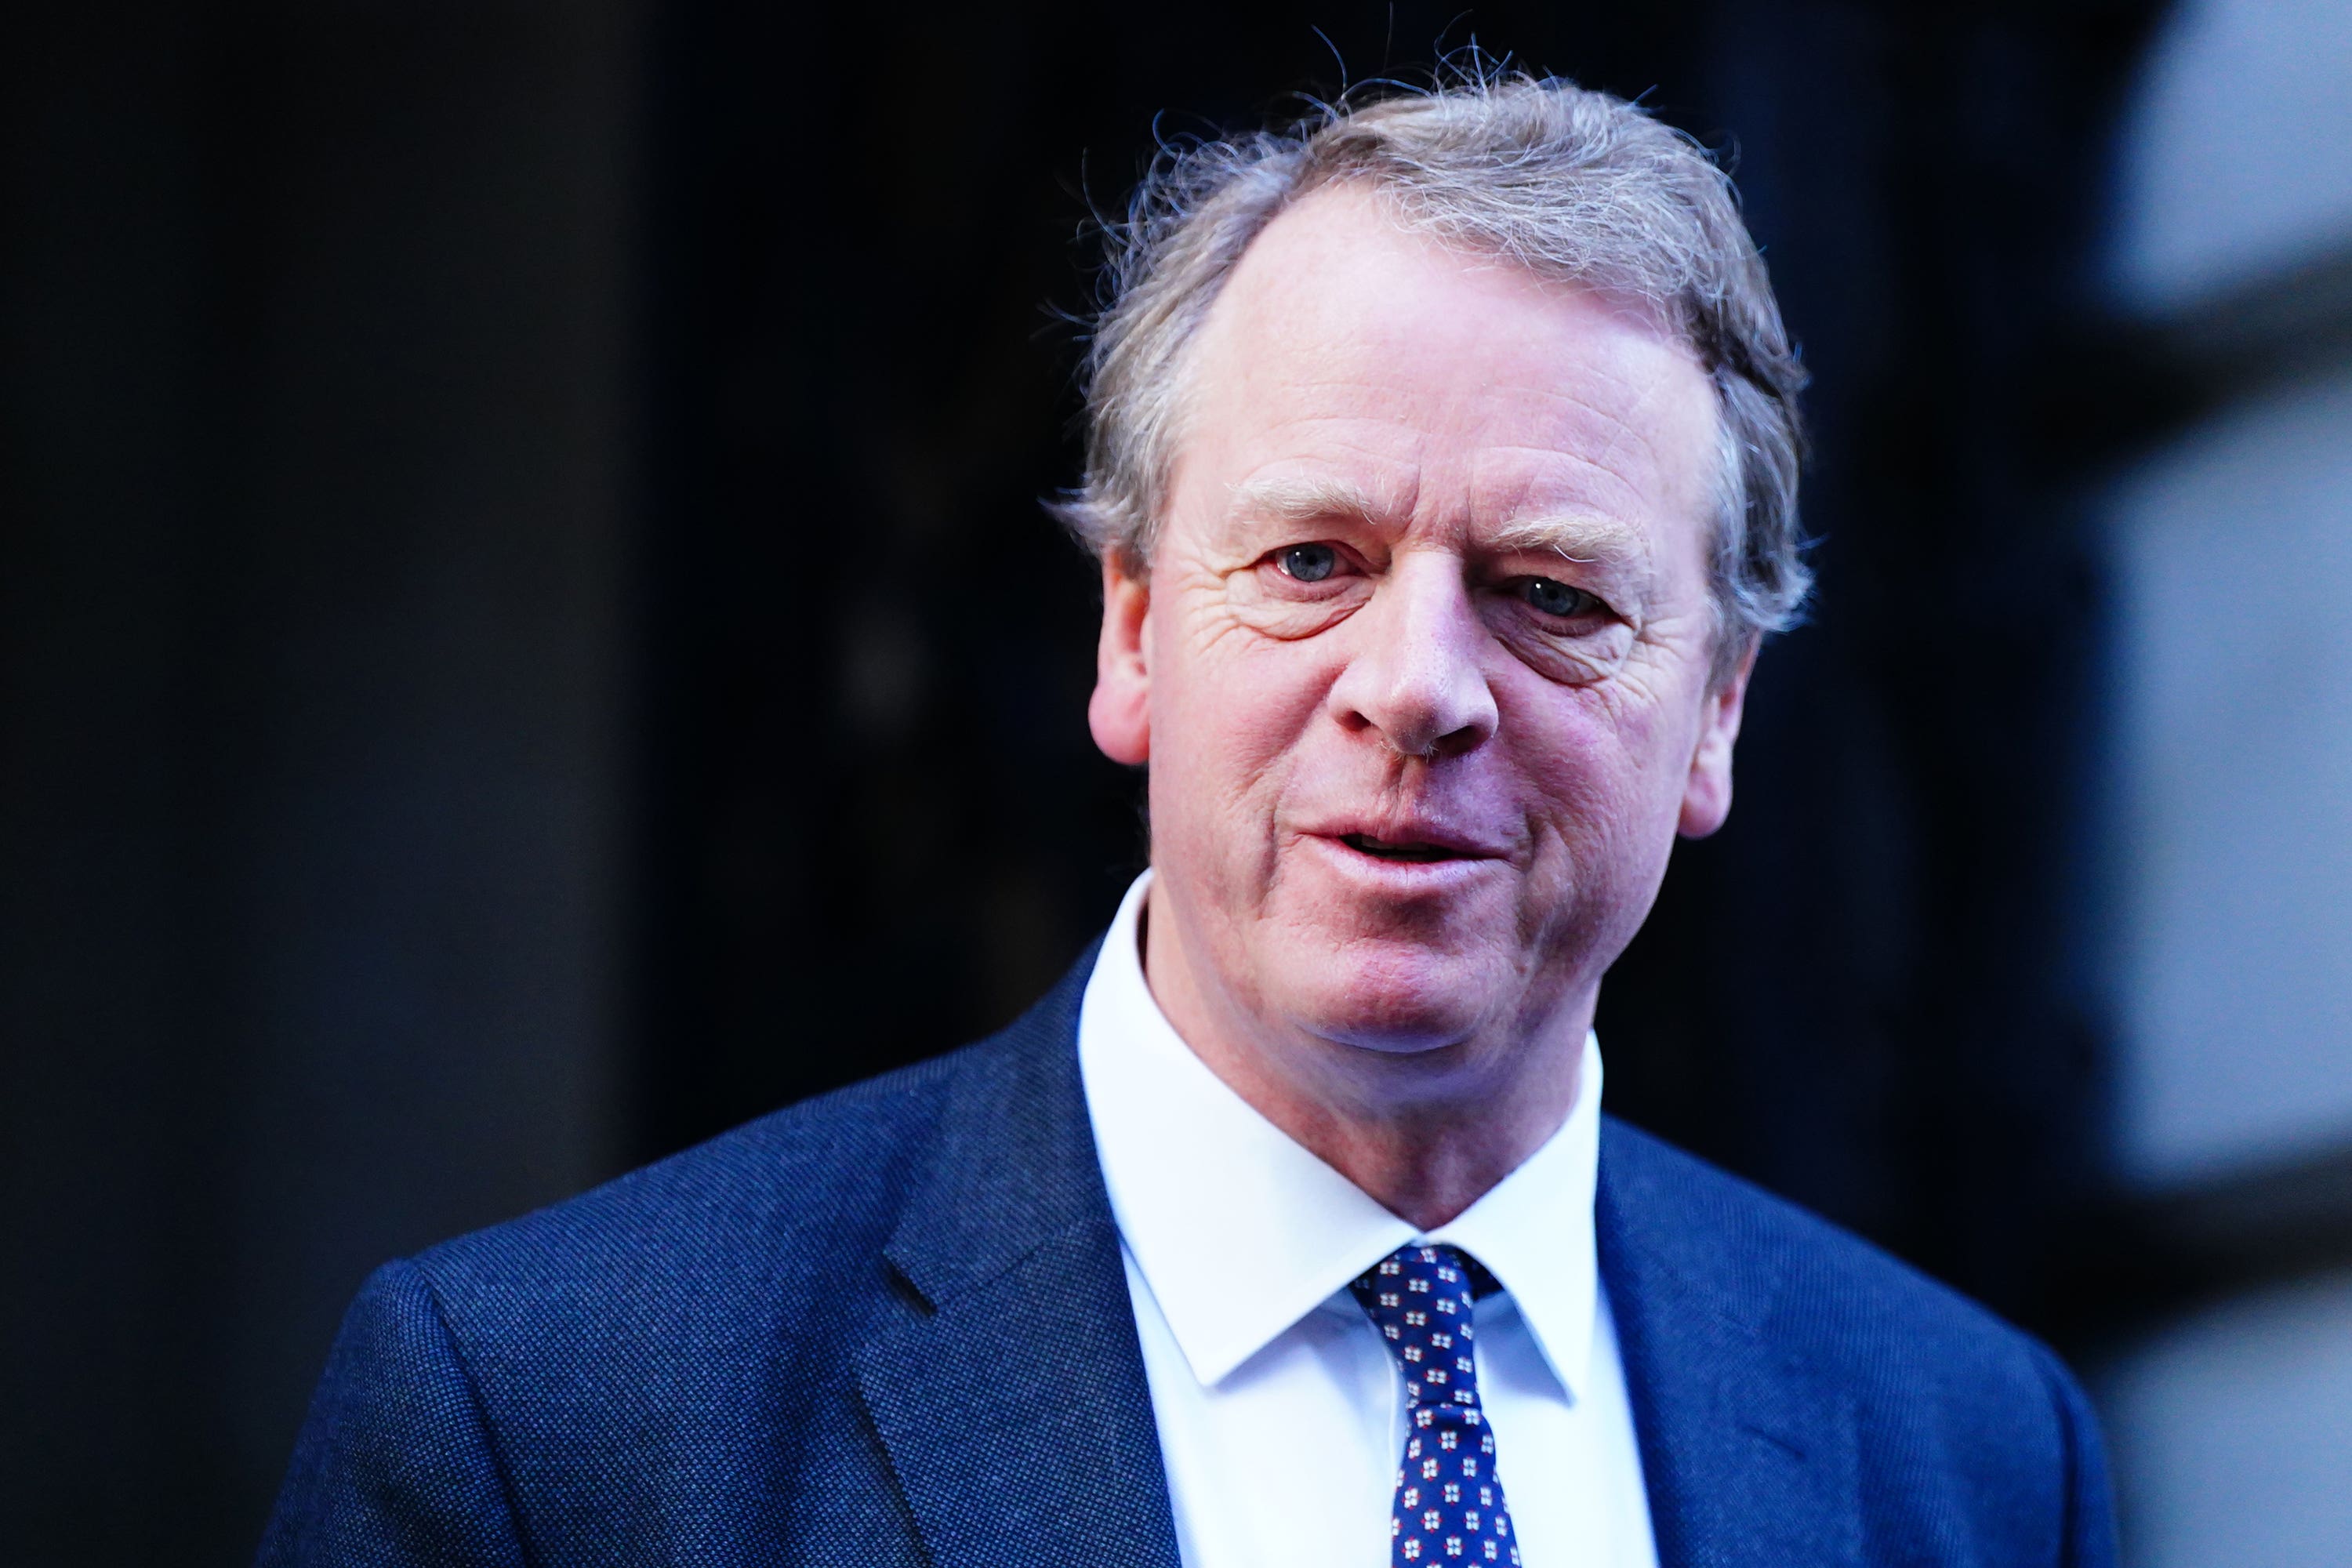 Scottish Secretary Alister Jack said the election of a new first minister was a chance to ‘reset’ the relationship between the Scottish and UK governments. (Victoria Jones/PA)